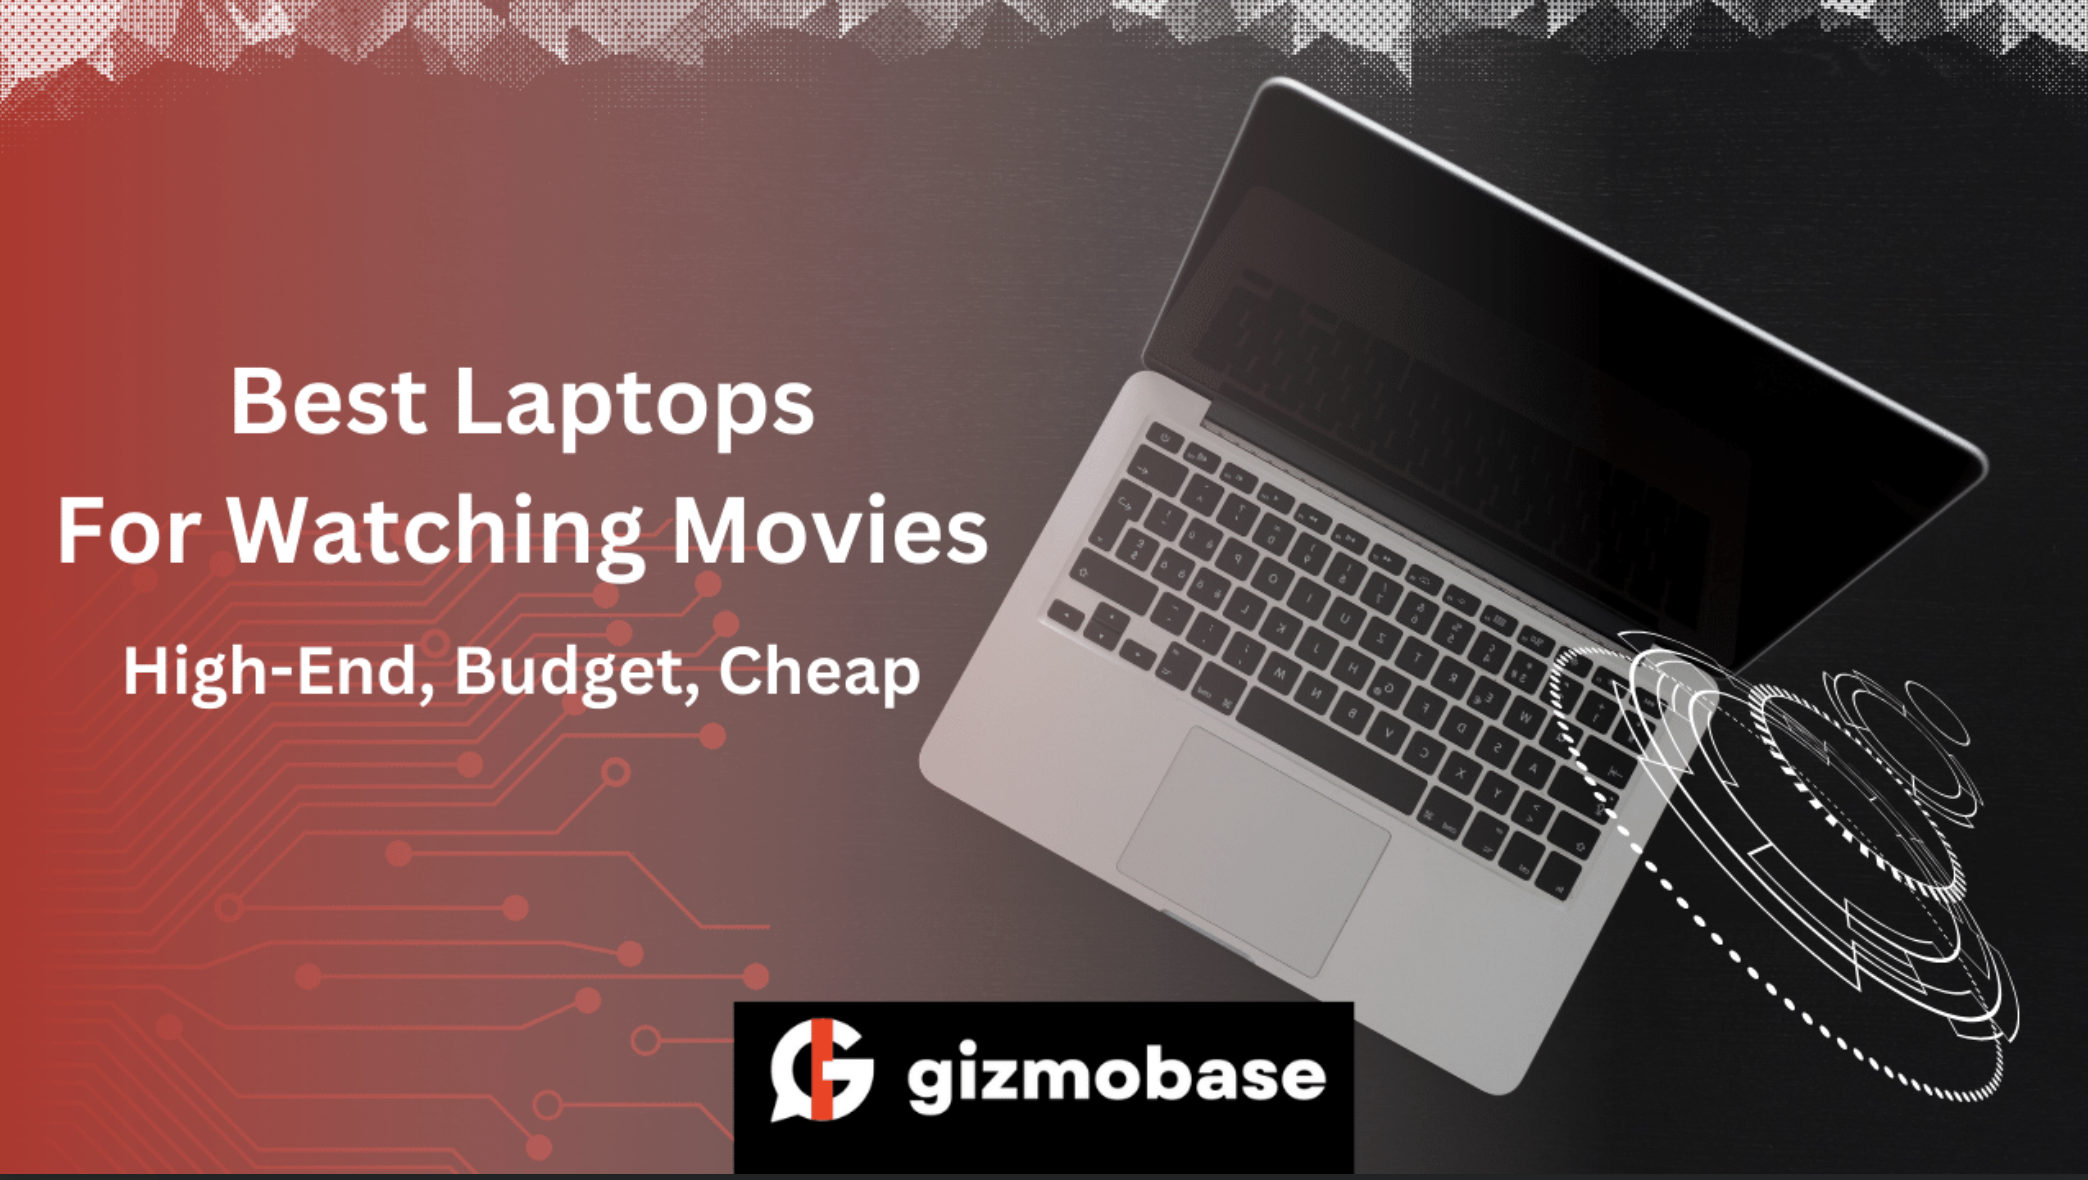 Best Laptops For Watching Movies